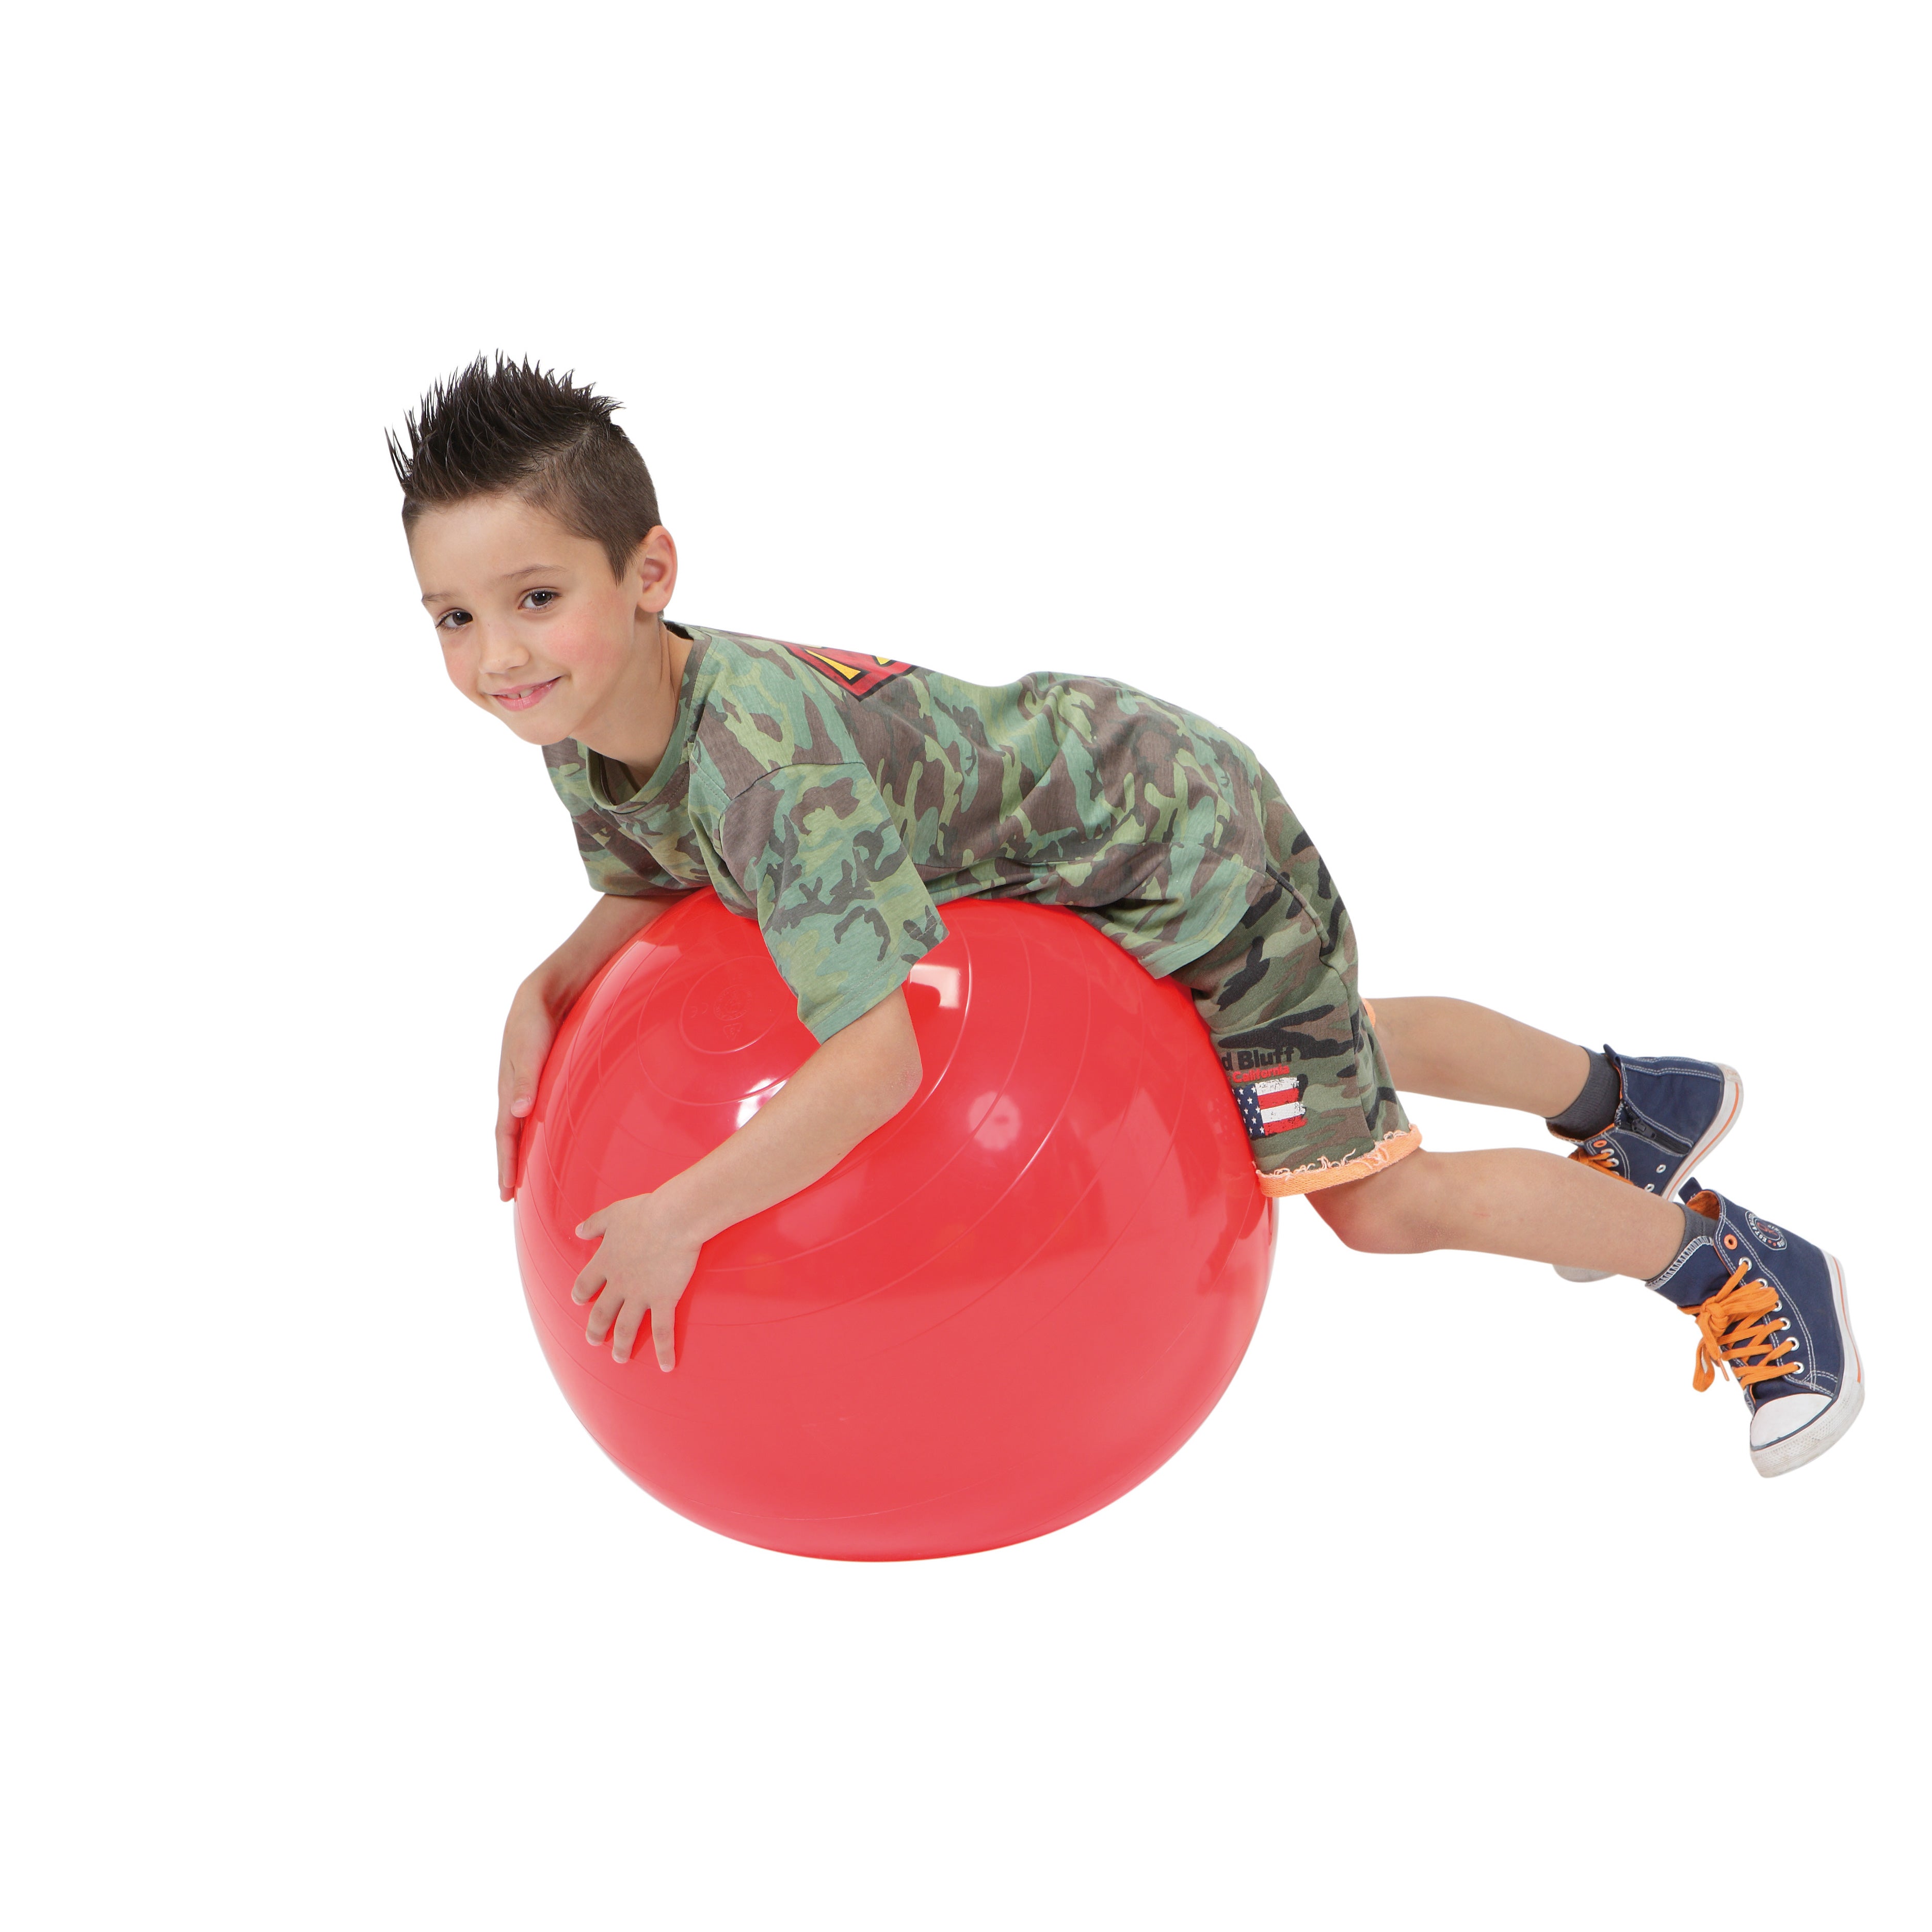 Gymnic Classic Physiotherapy Ball (55cm)